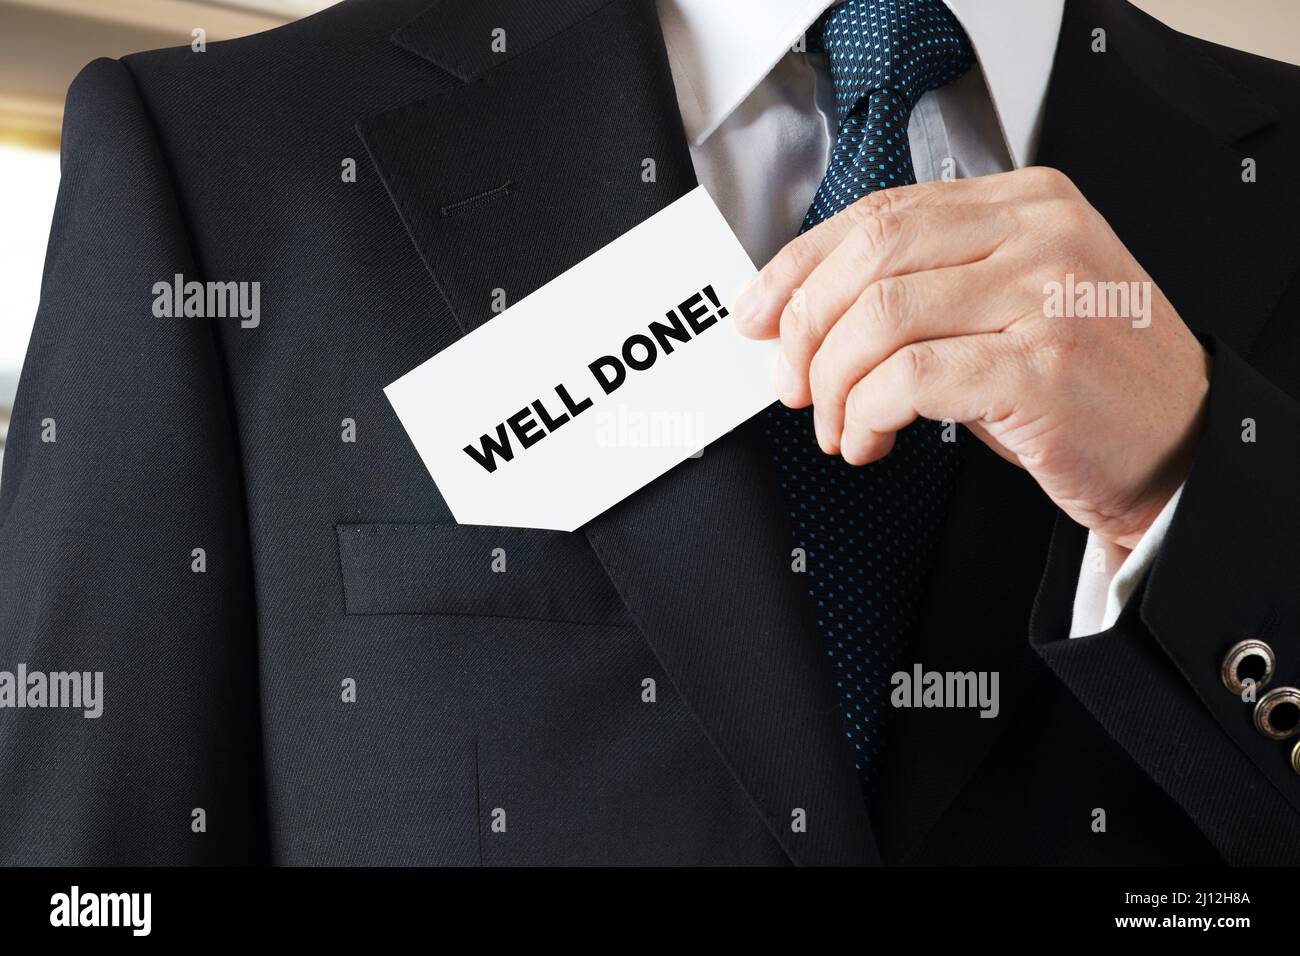 Businessman takes out a business card from his pocket with the message well done. Stock Photo